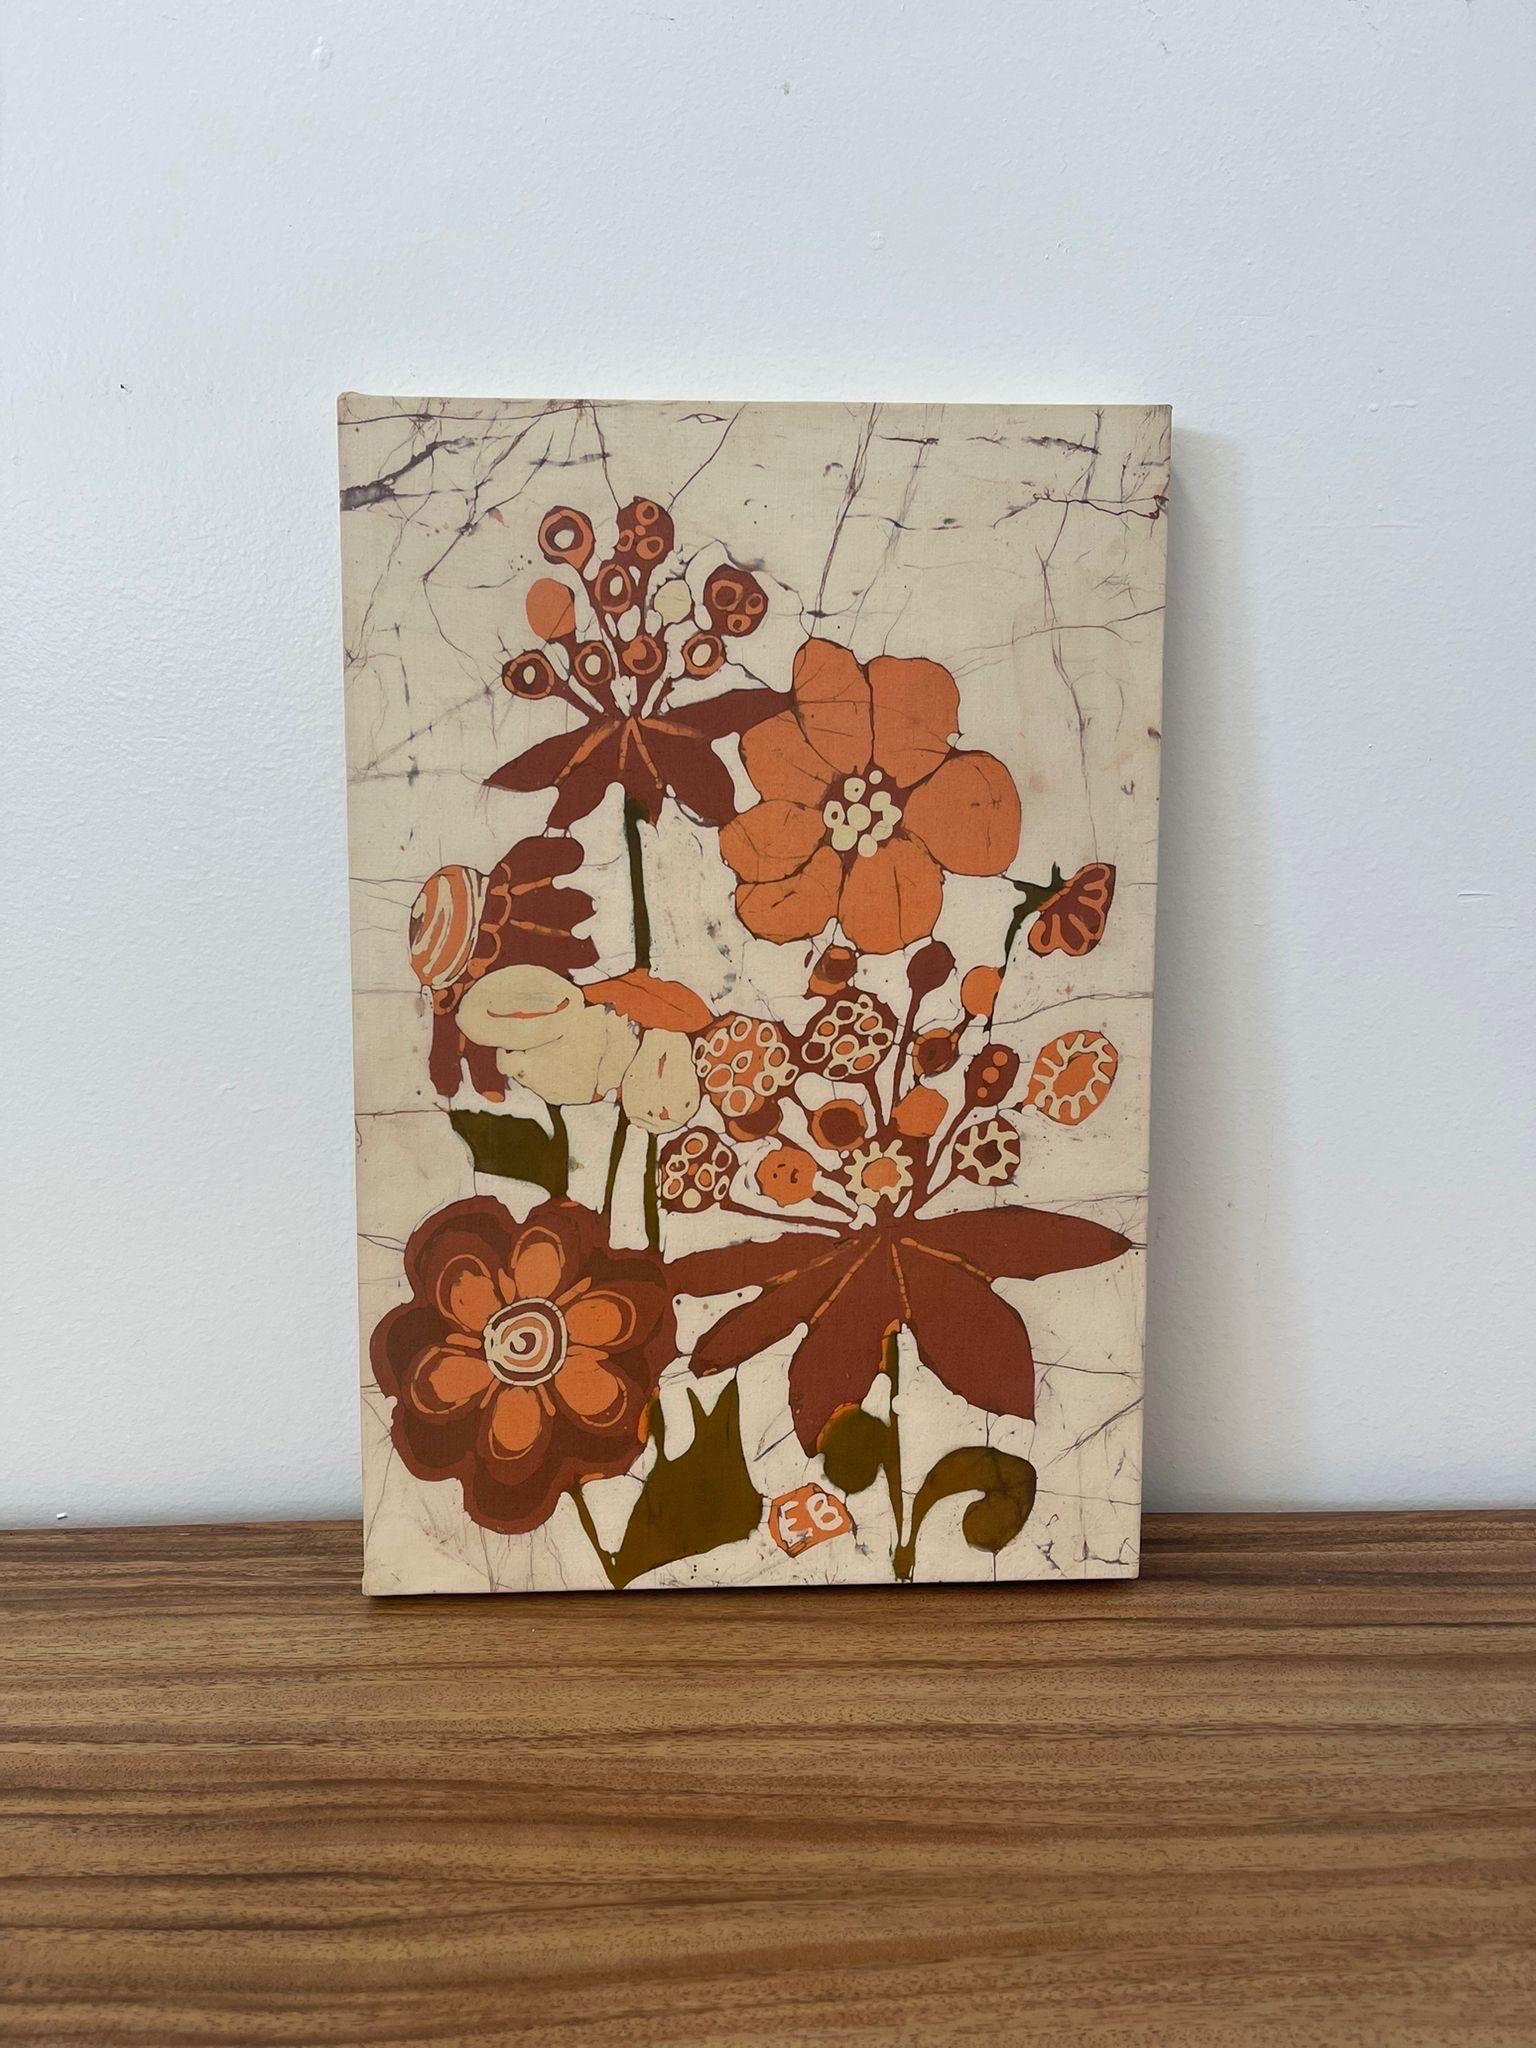 Abstract Orange Floral Painting Painting on Cloth , Wrapped Around Canvas. MakersCard on the Back as Shown. Vintage Condition Consistent with Age as Pictured.

Dimensions. 13 W ; 19 H